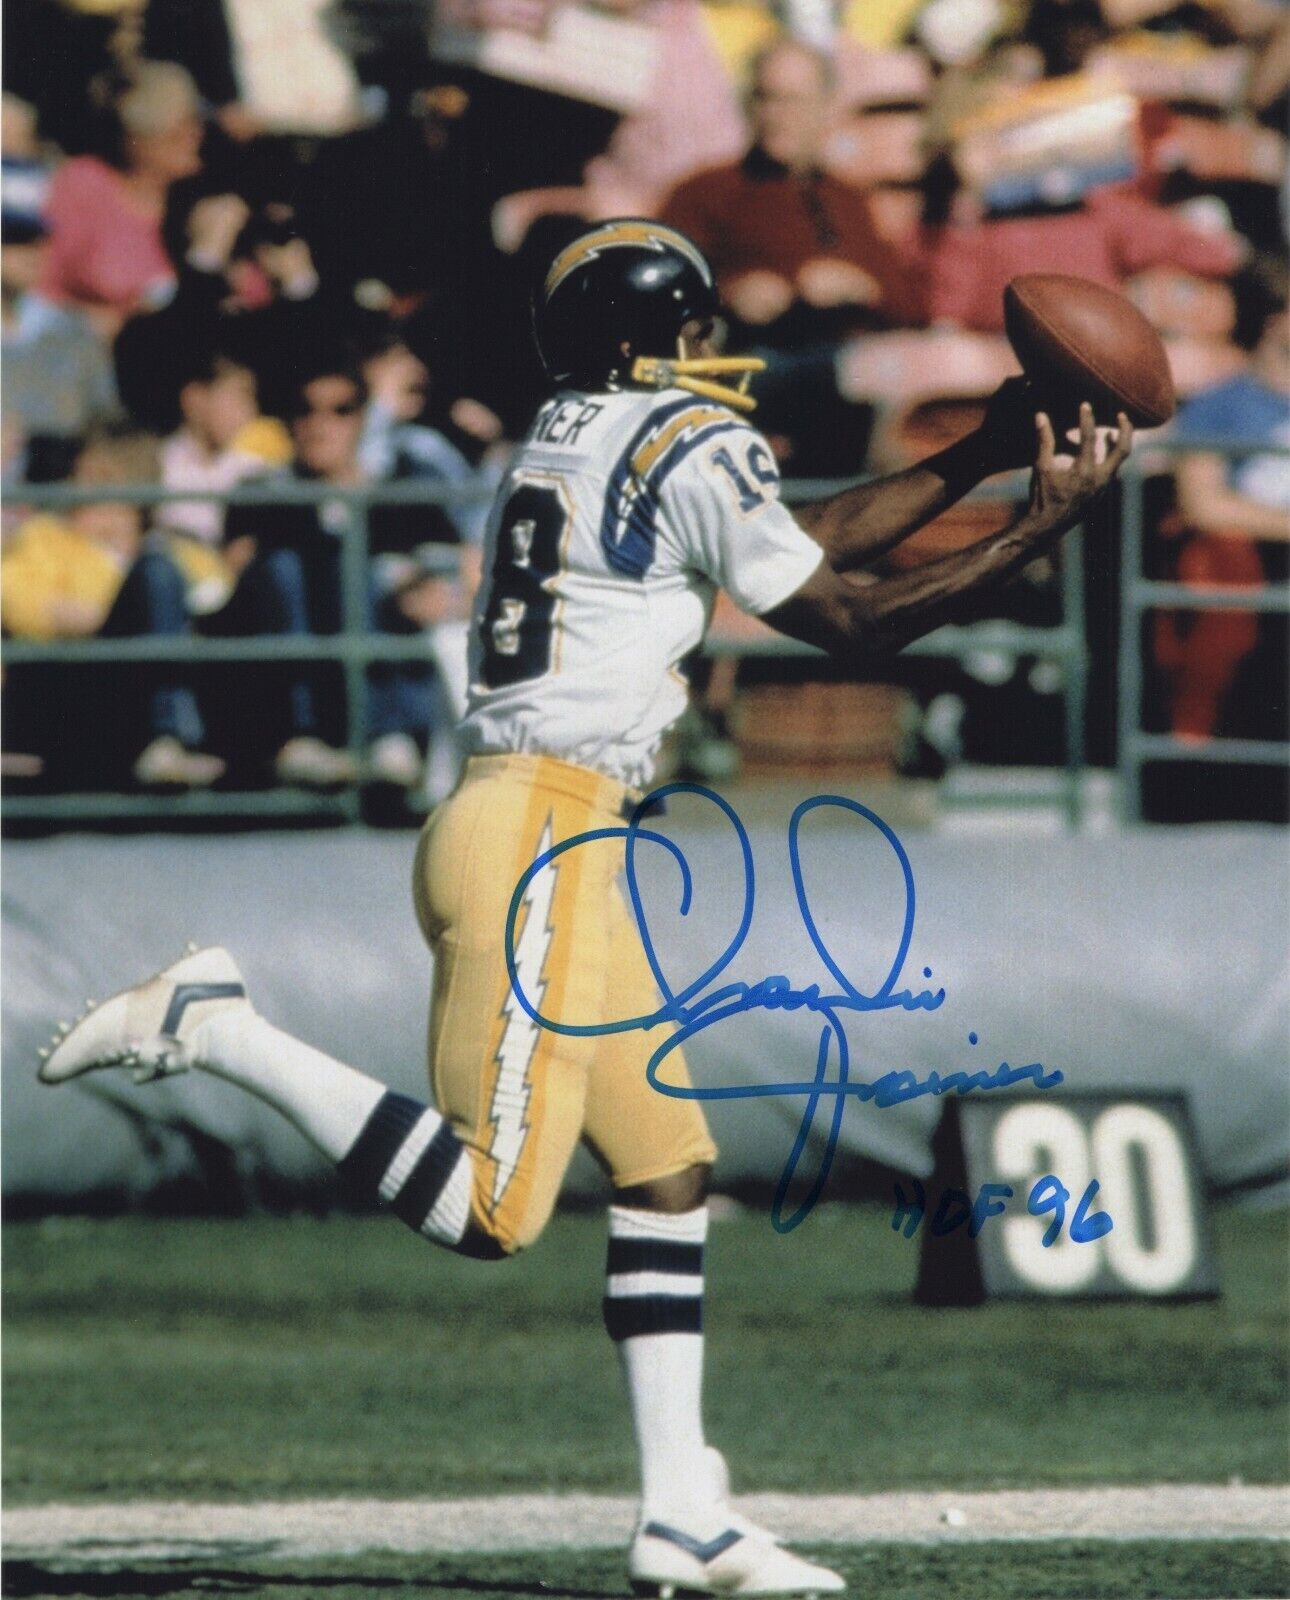 CHARLIE JOINER SIGNED AUTOGRAPH 8X10 Photo Poster painting SAN DIEGO CHARGERS HALL OF FAME